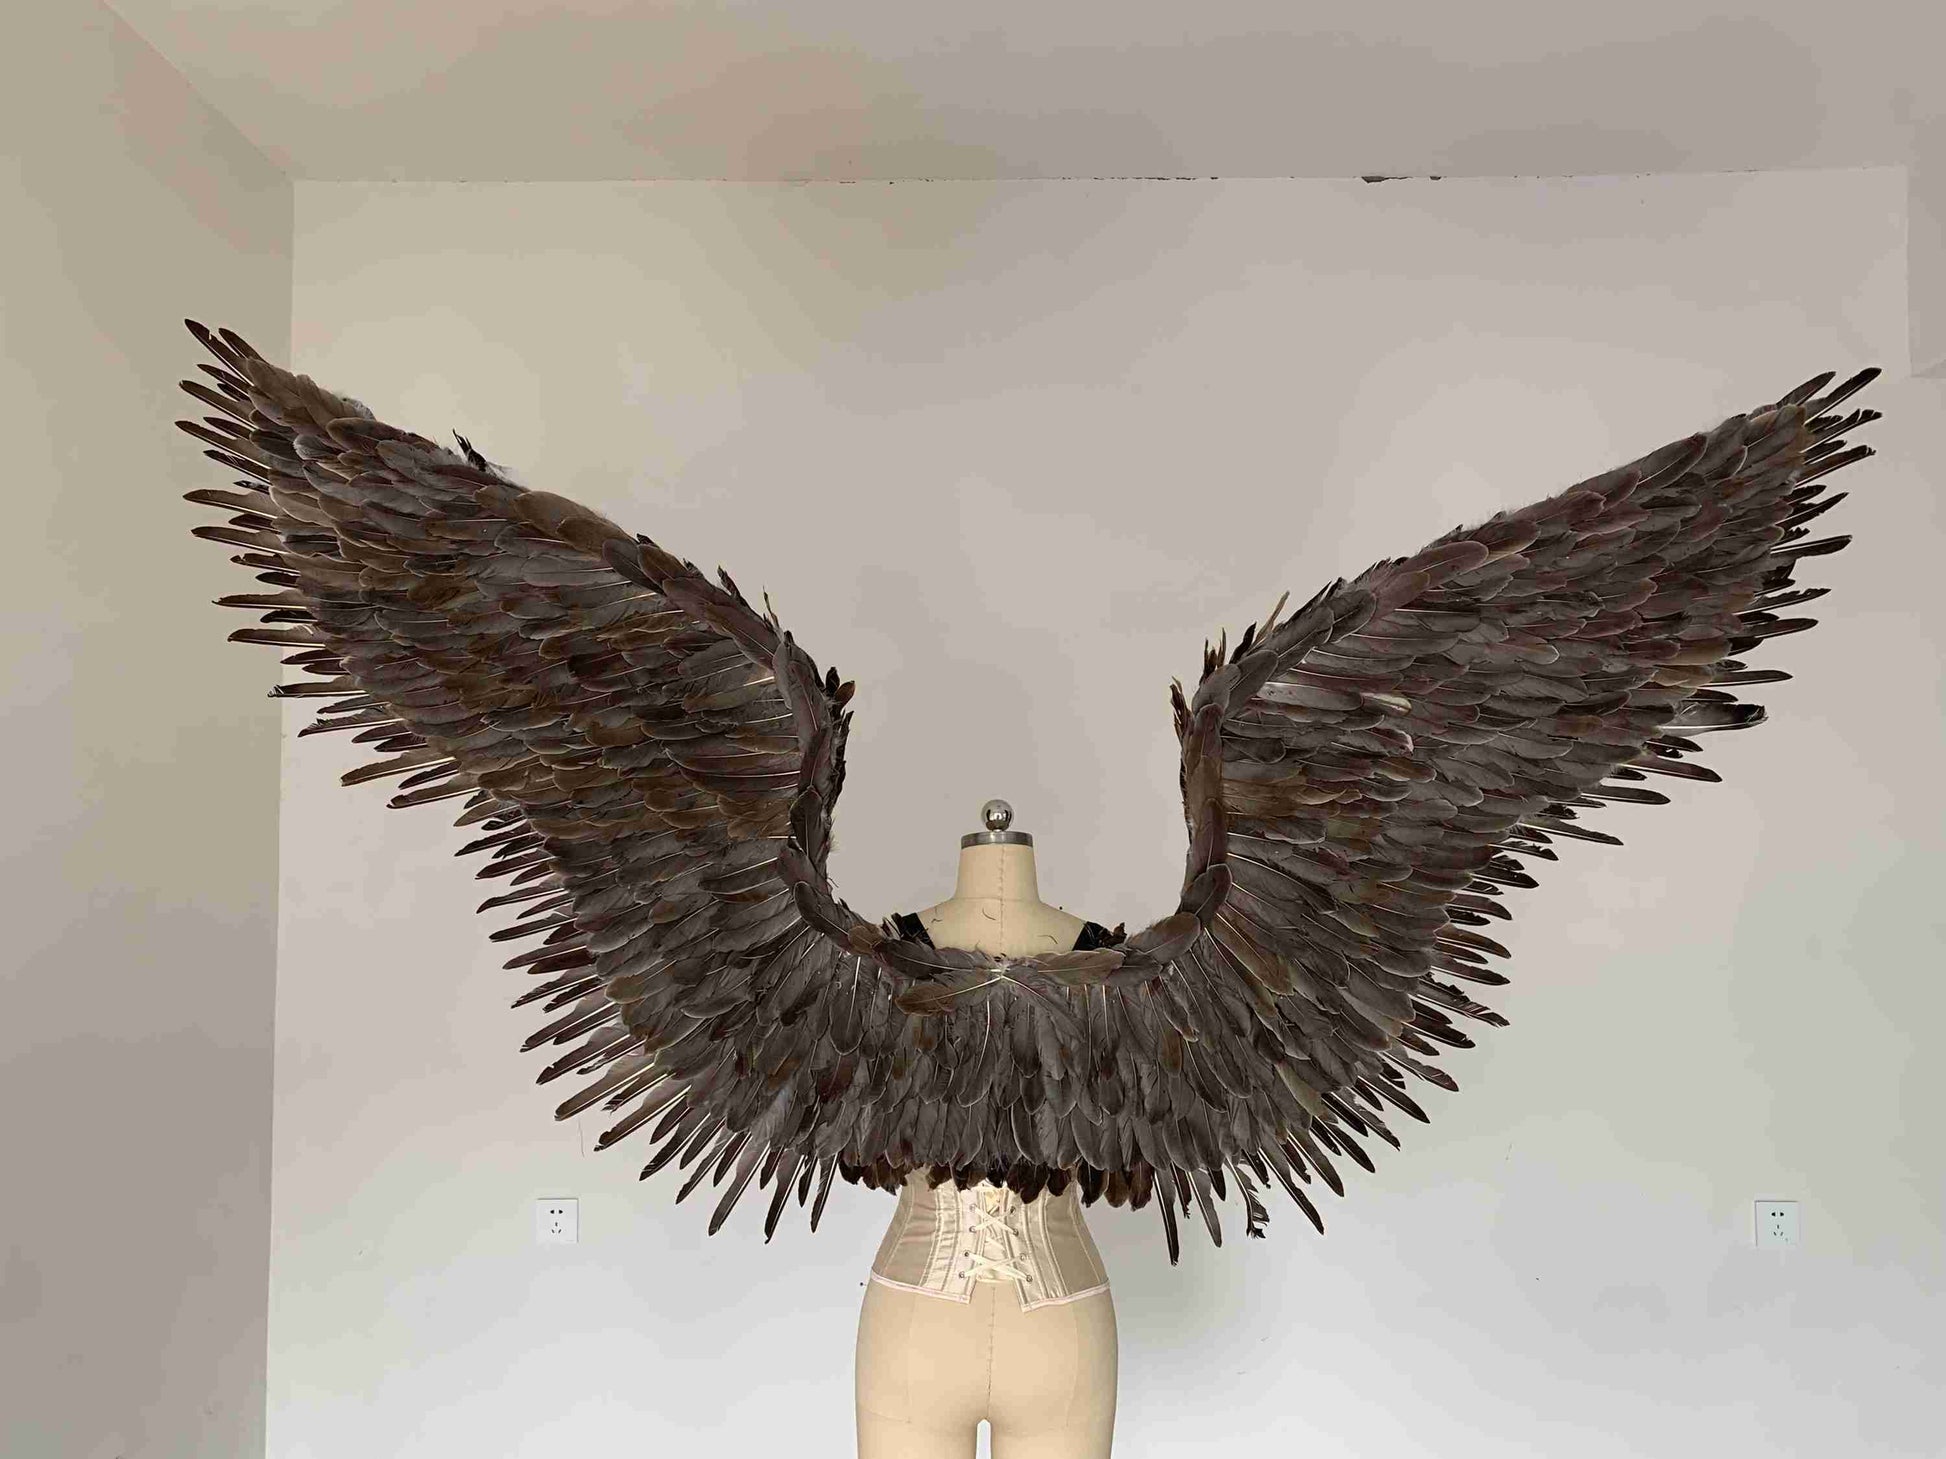 Our grey color angel wings from the back. Made from goose feathers. Wings for angel costume or devil costume. Suitable for photoshoots.